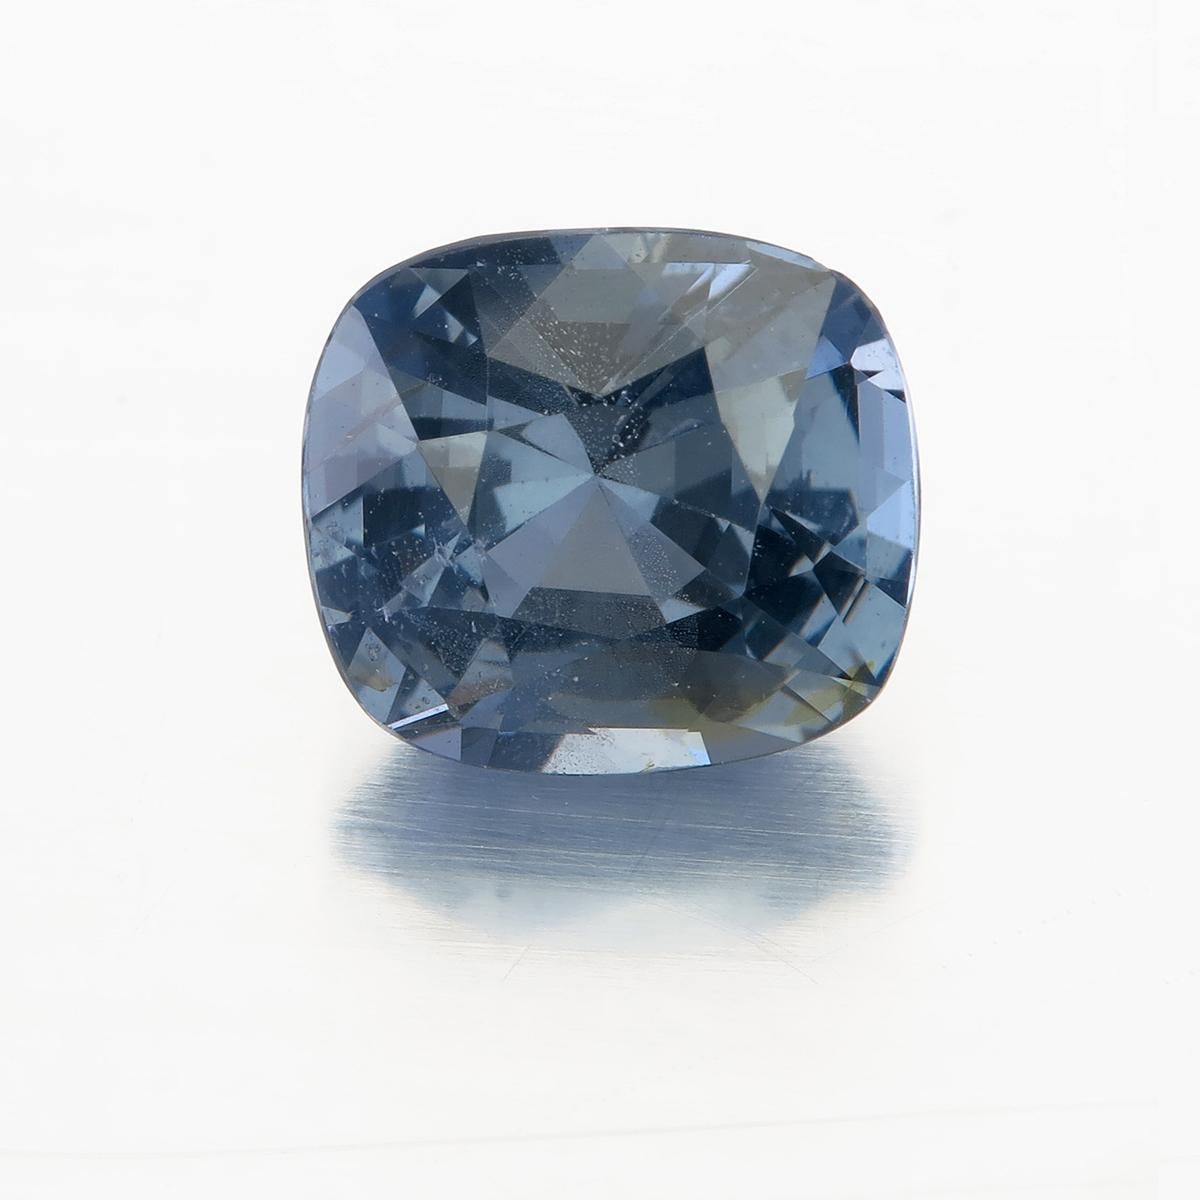 3.41 carat Gray Spinel from Sri Lanka (Ceylon)
Lotus certified: 1468-8312
Shape: Antique Cushion
Cutting style: Faceted, Crown Brilliant, Pavilion: Modified Step
Color: Gray low saturation with a medium-deep tone.
Dimensions: 9.33 x 8.44 x 6.01